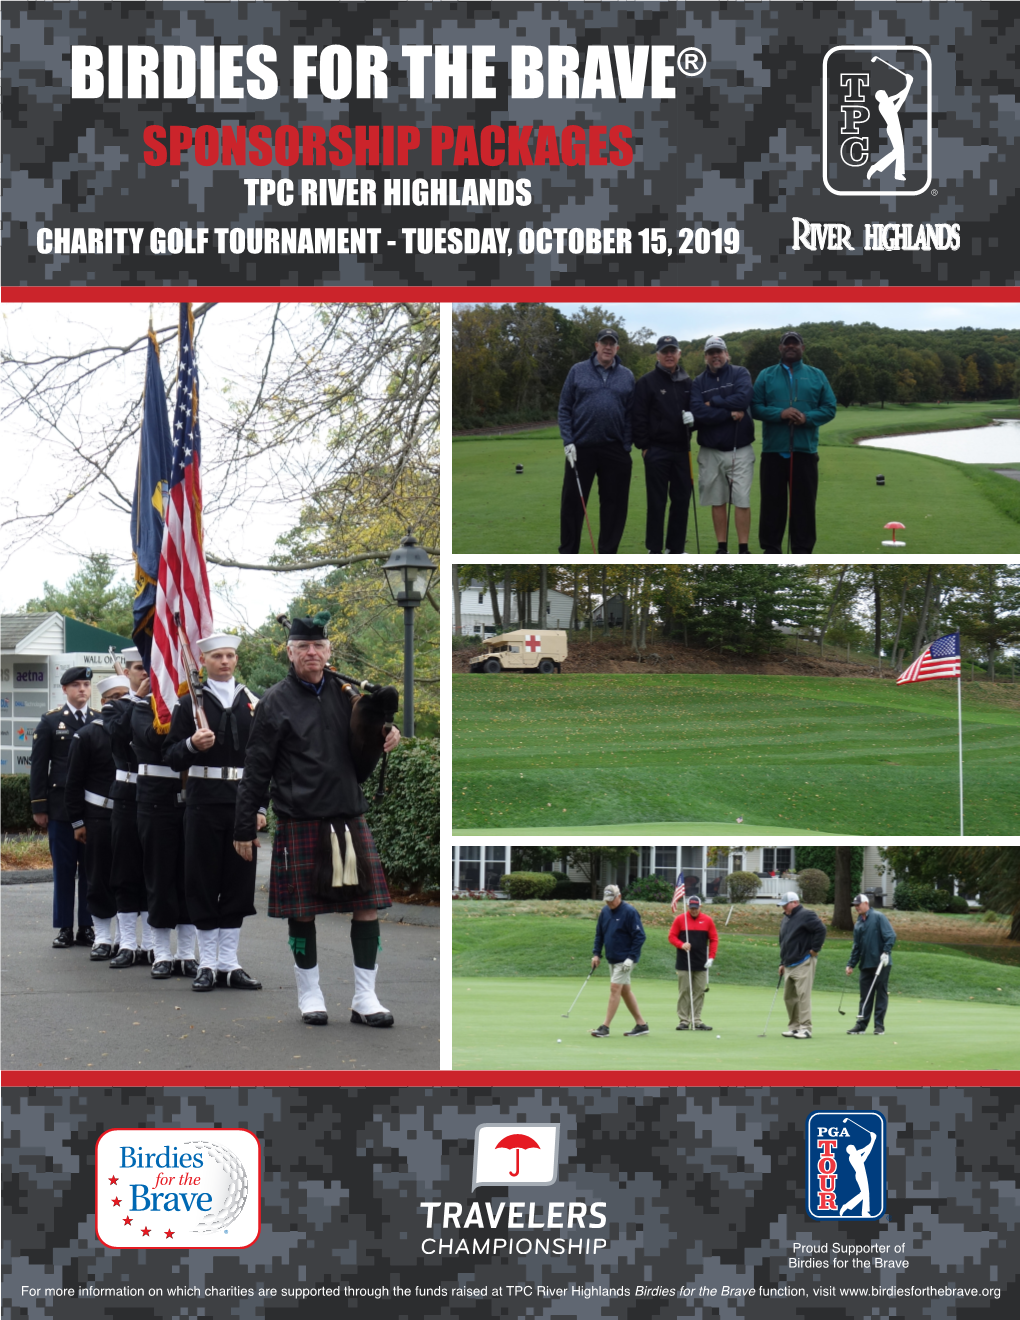 Birdies for the Brave® Sponsorship Packages Tpc River Highlands Charity Golf Tournament - Tuesday, October 15, 2019